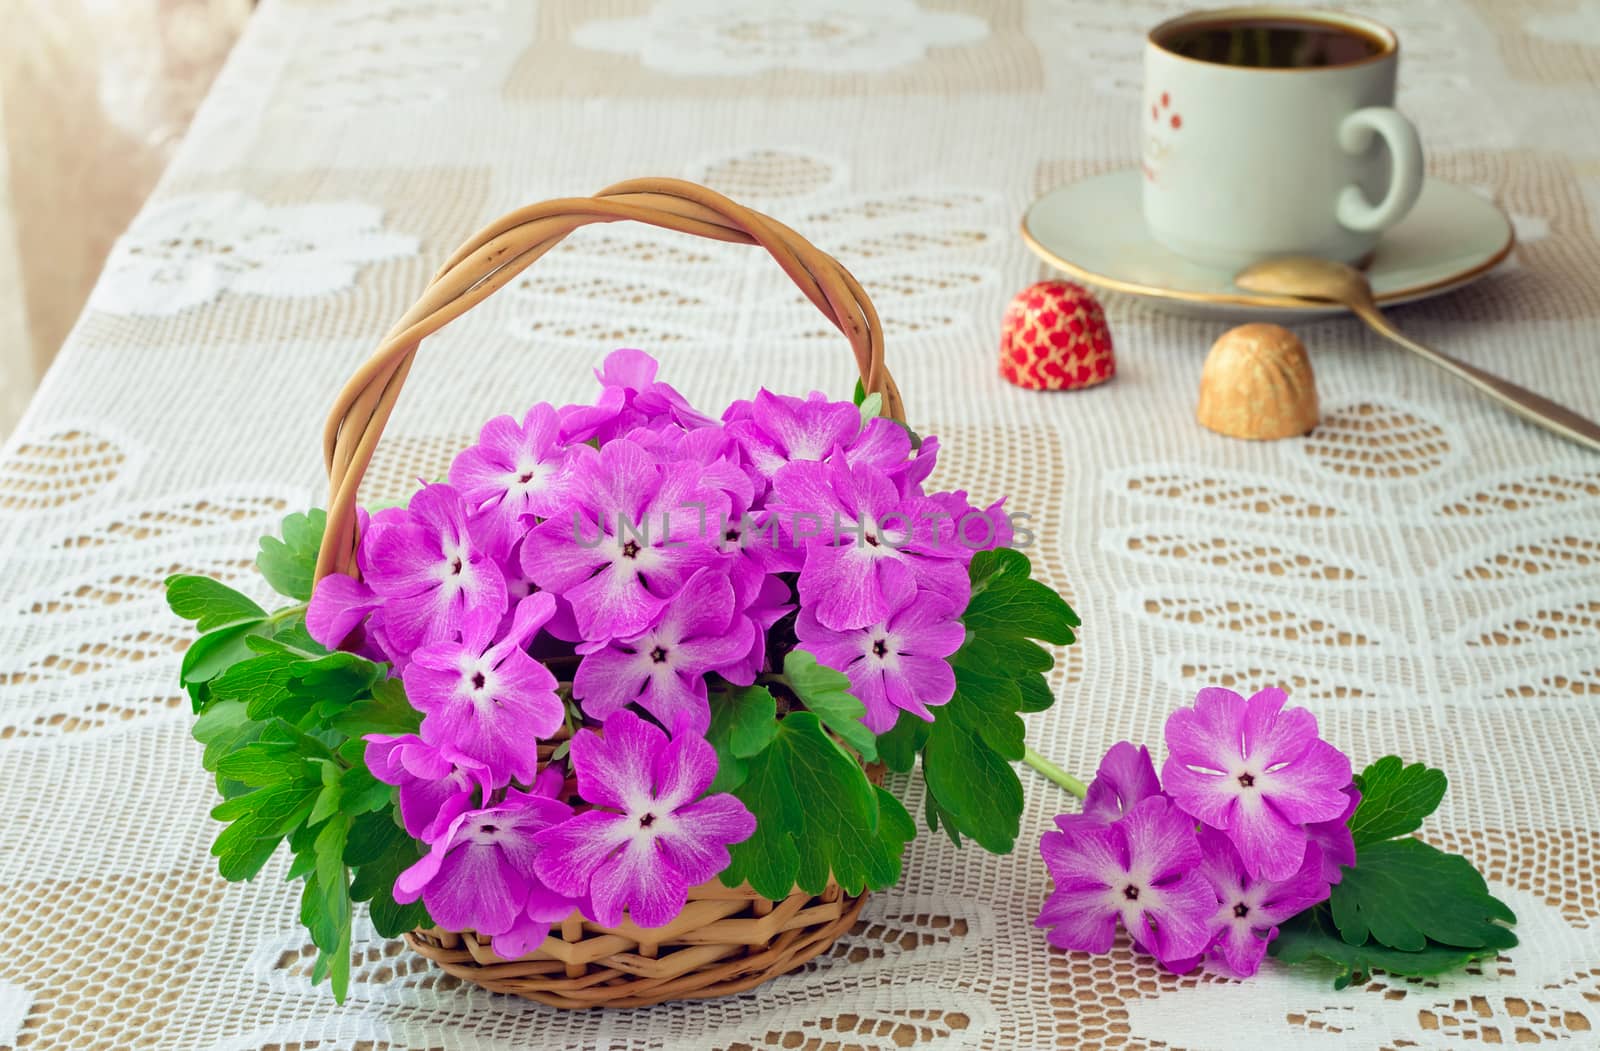 Wattled basket with blossoming violets on a table. by georgina198